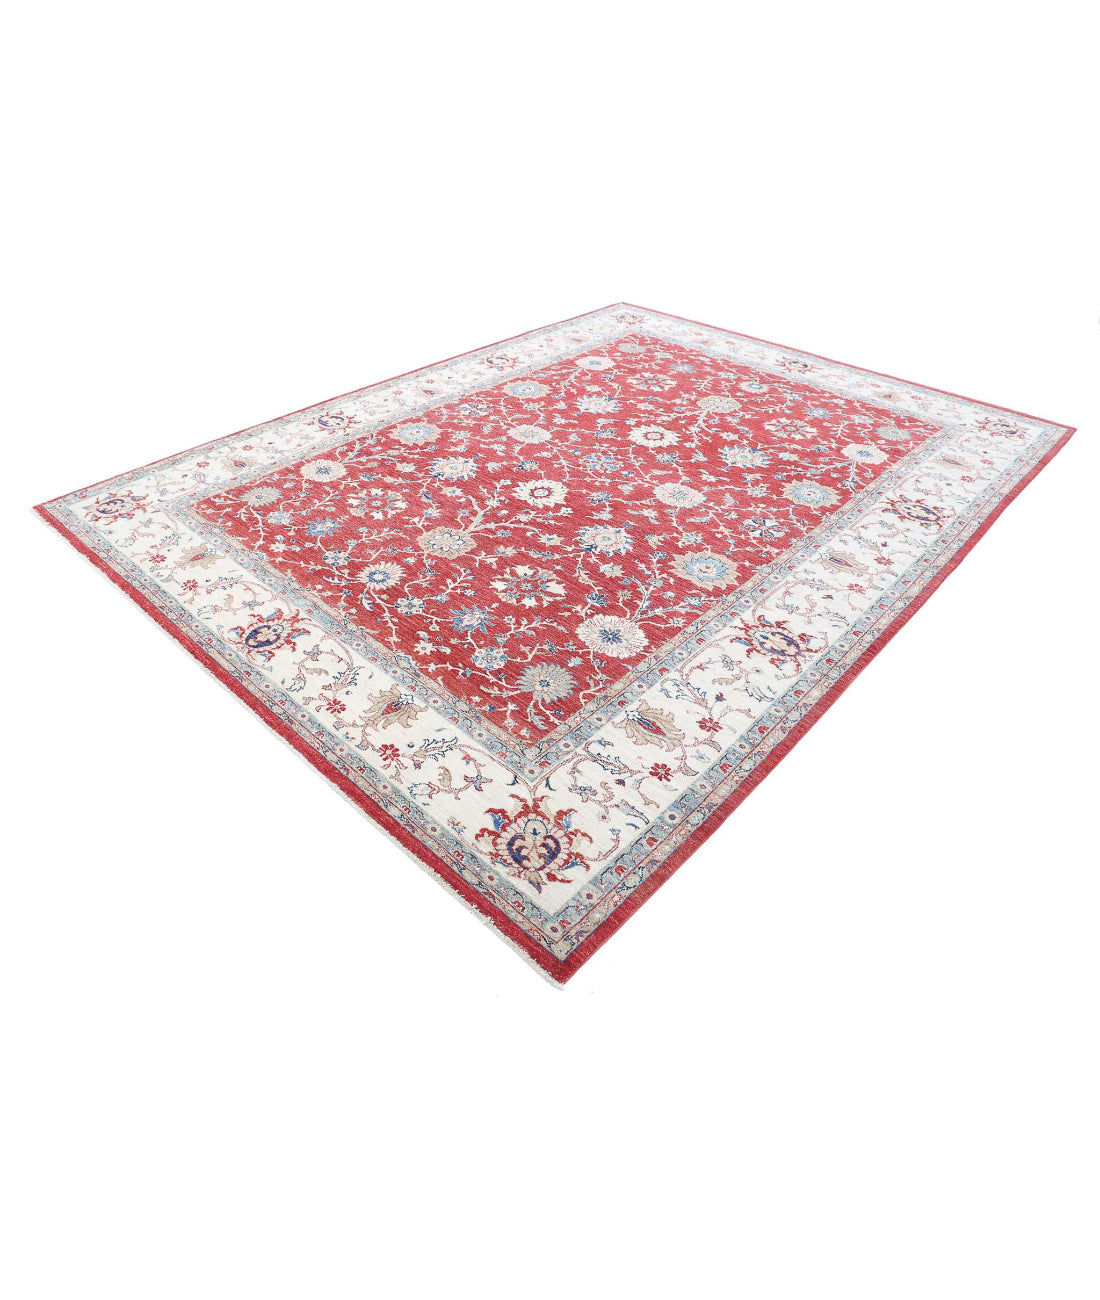 Ziegler 8'4'' X 11'1'' Hand-Knotted Wool Rug 8'4'' x 11'1'' (250 X 333) / Red / Ivory